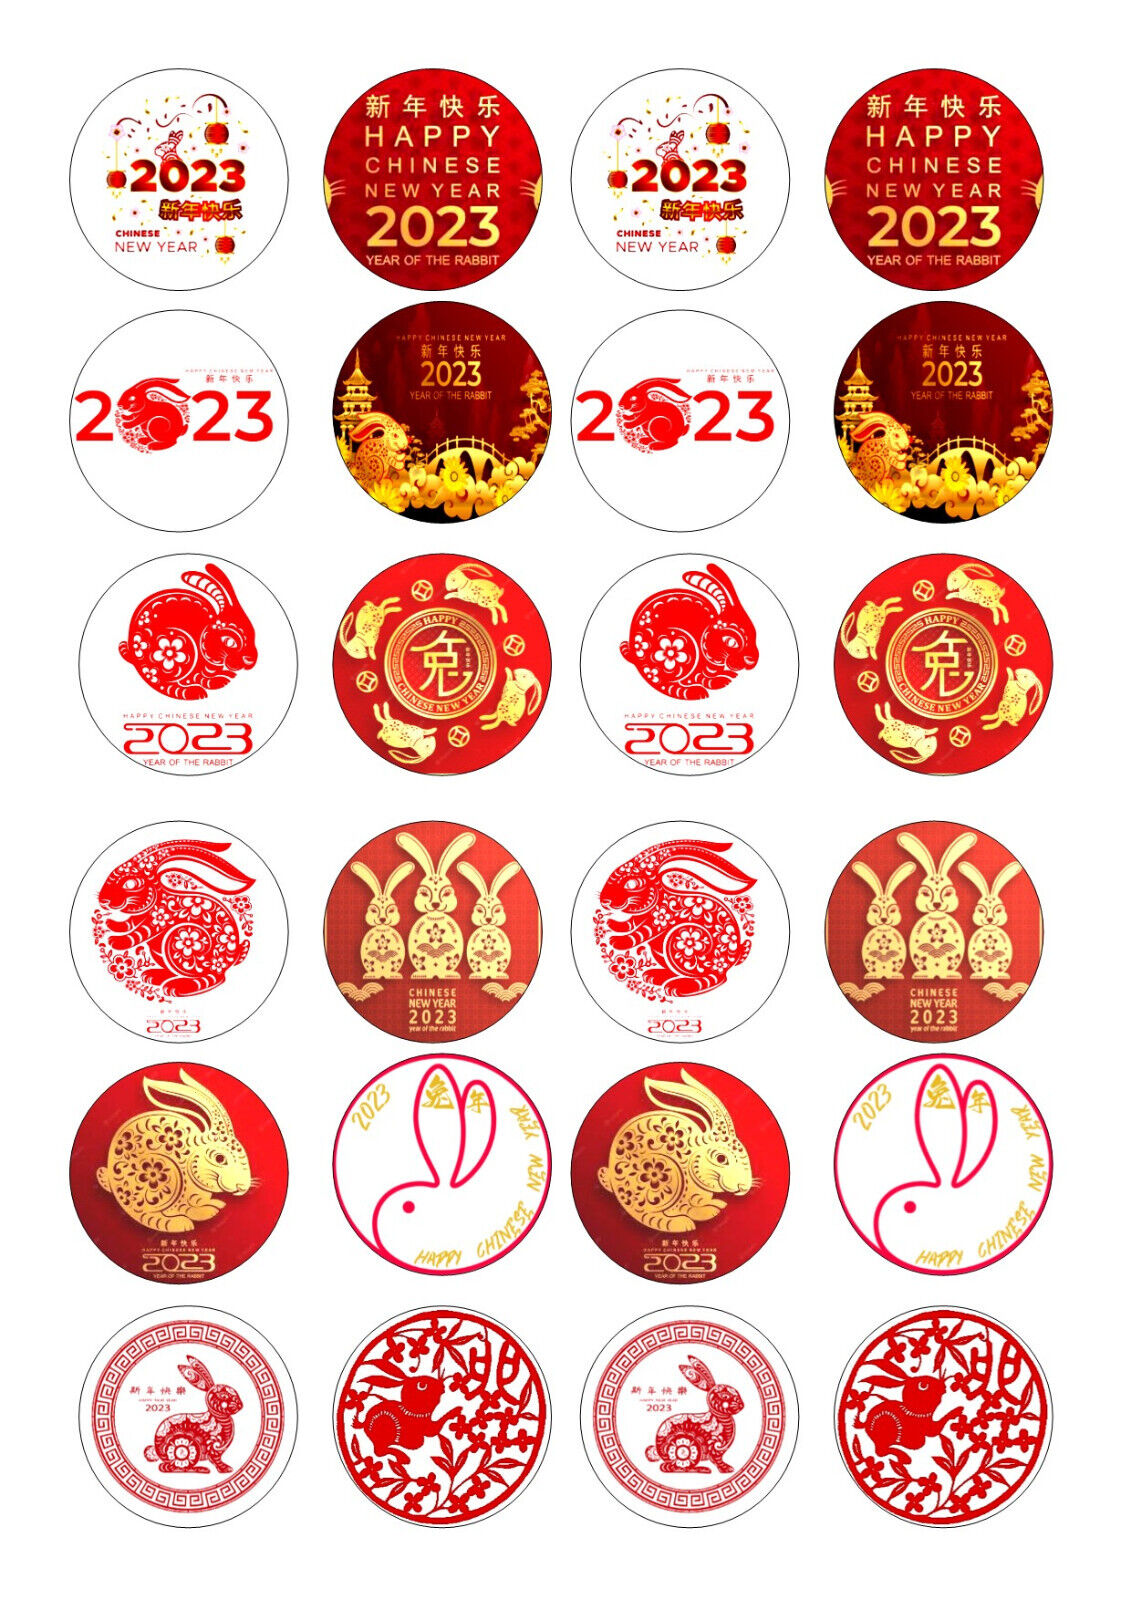 CHINESE NEW YEAR 2023 TOPPERS MADE WITH ICED ICING FROSTING